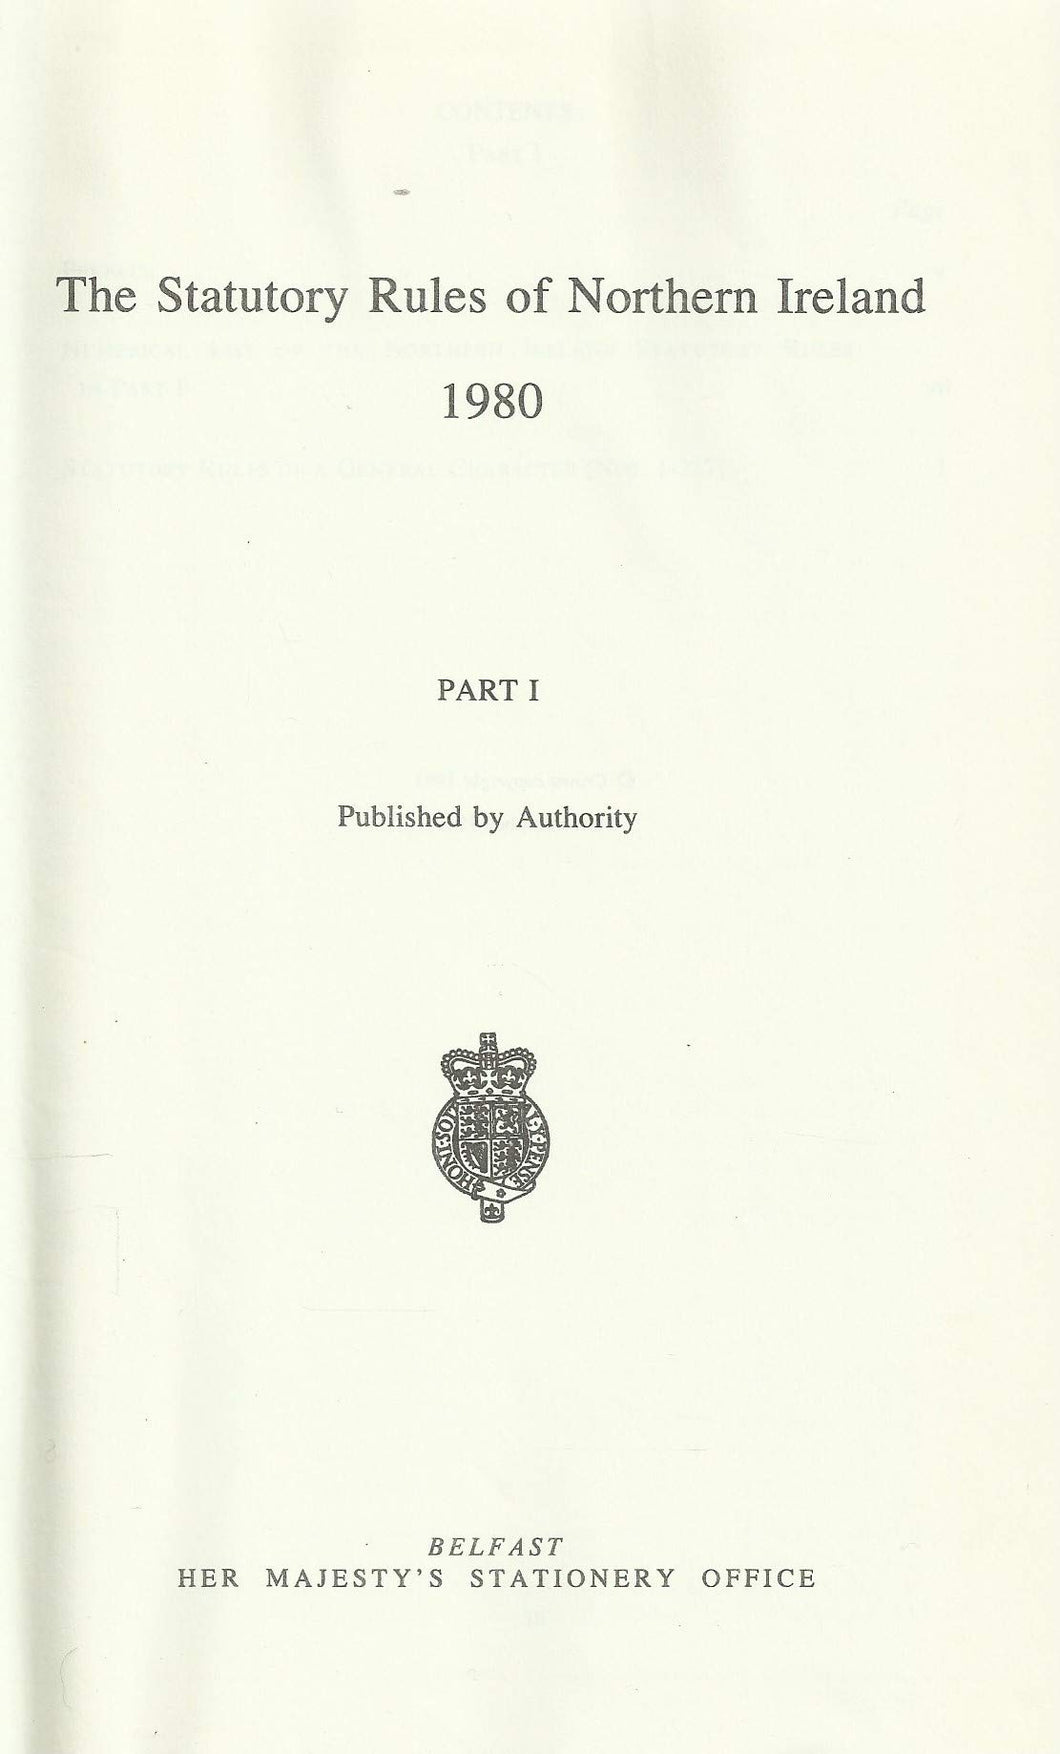 The Statutory Rules of Northern Ireland: 1980 Part 1 nos